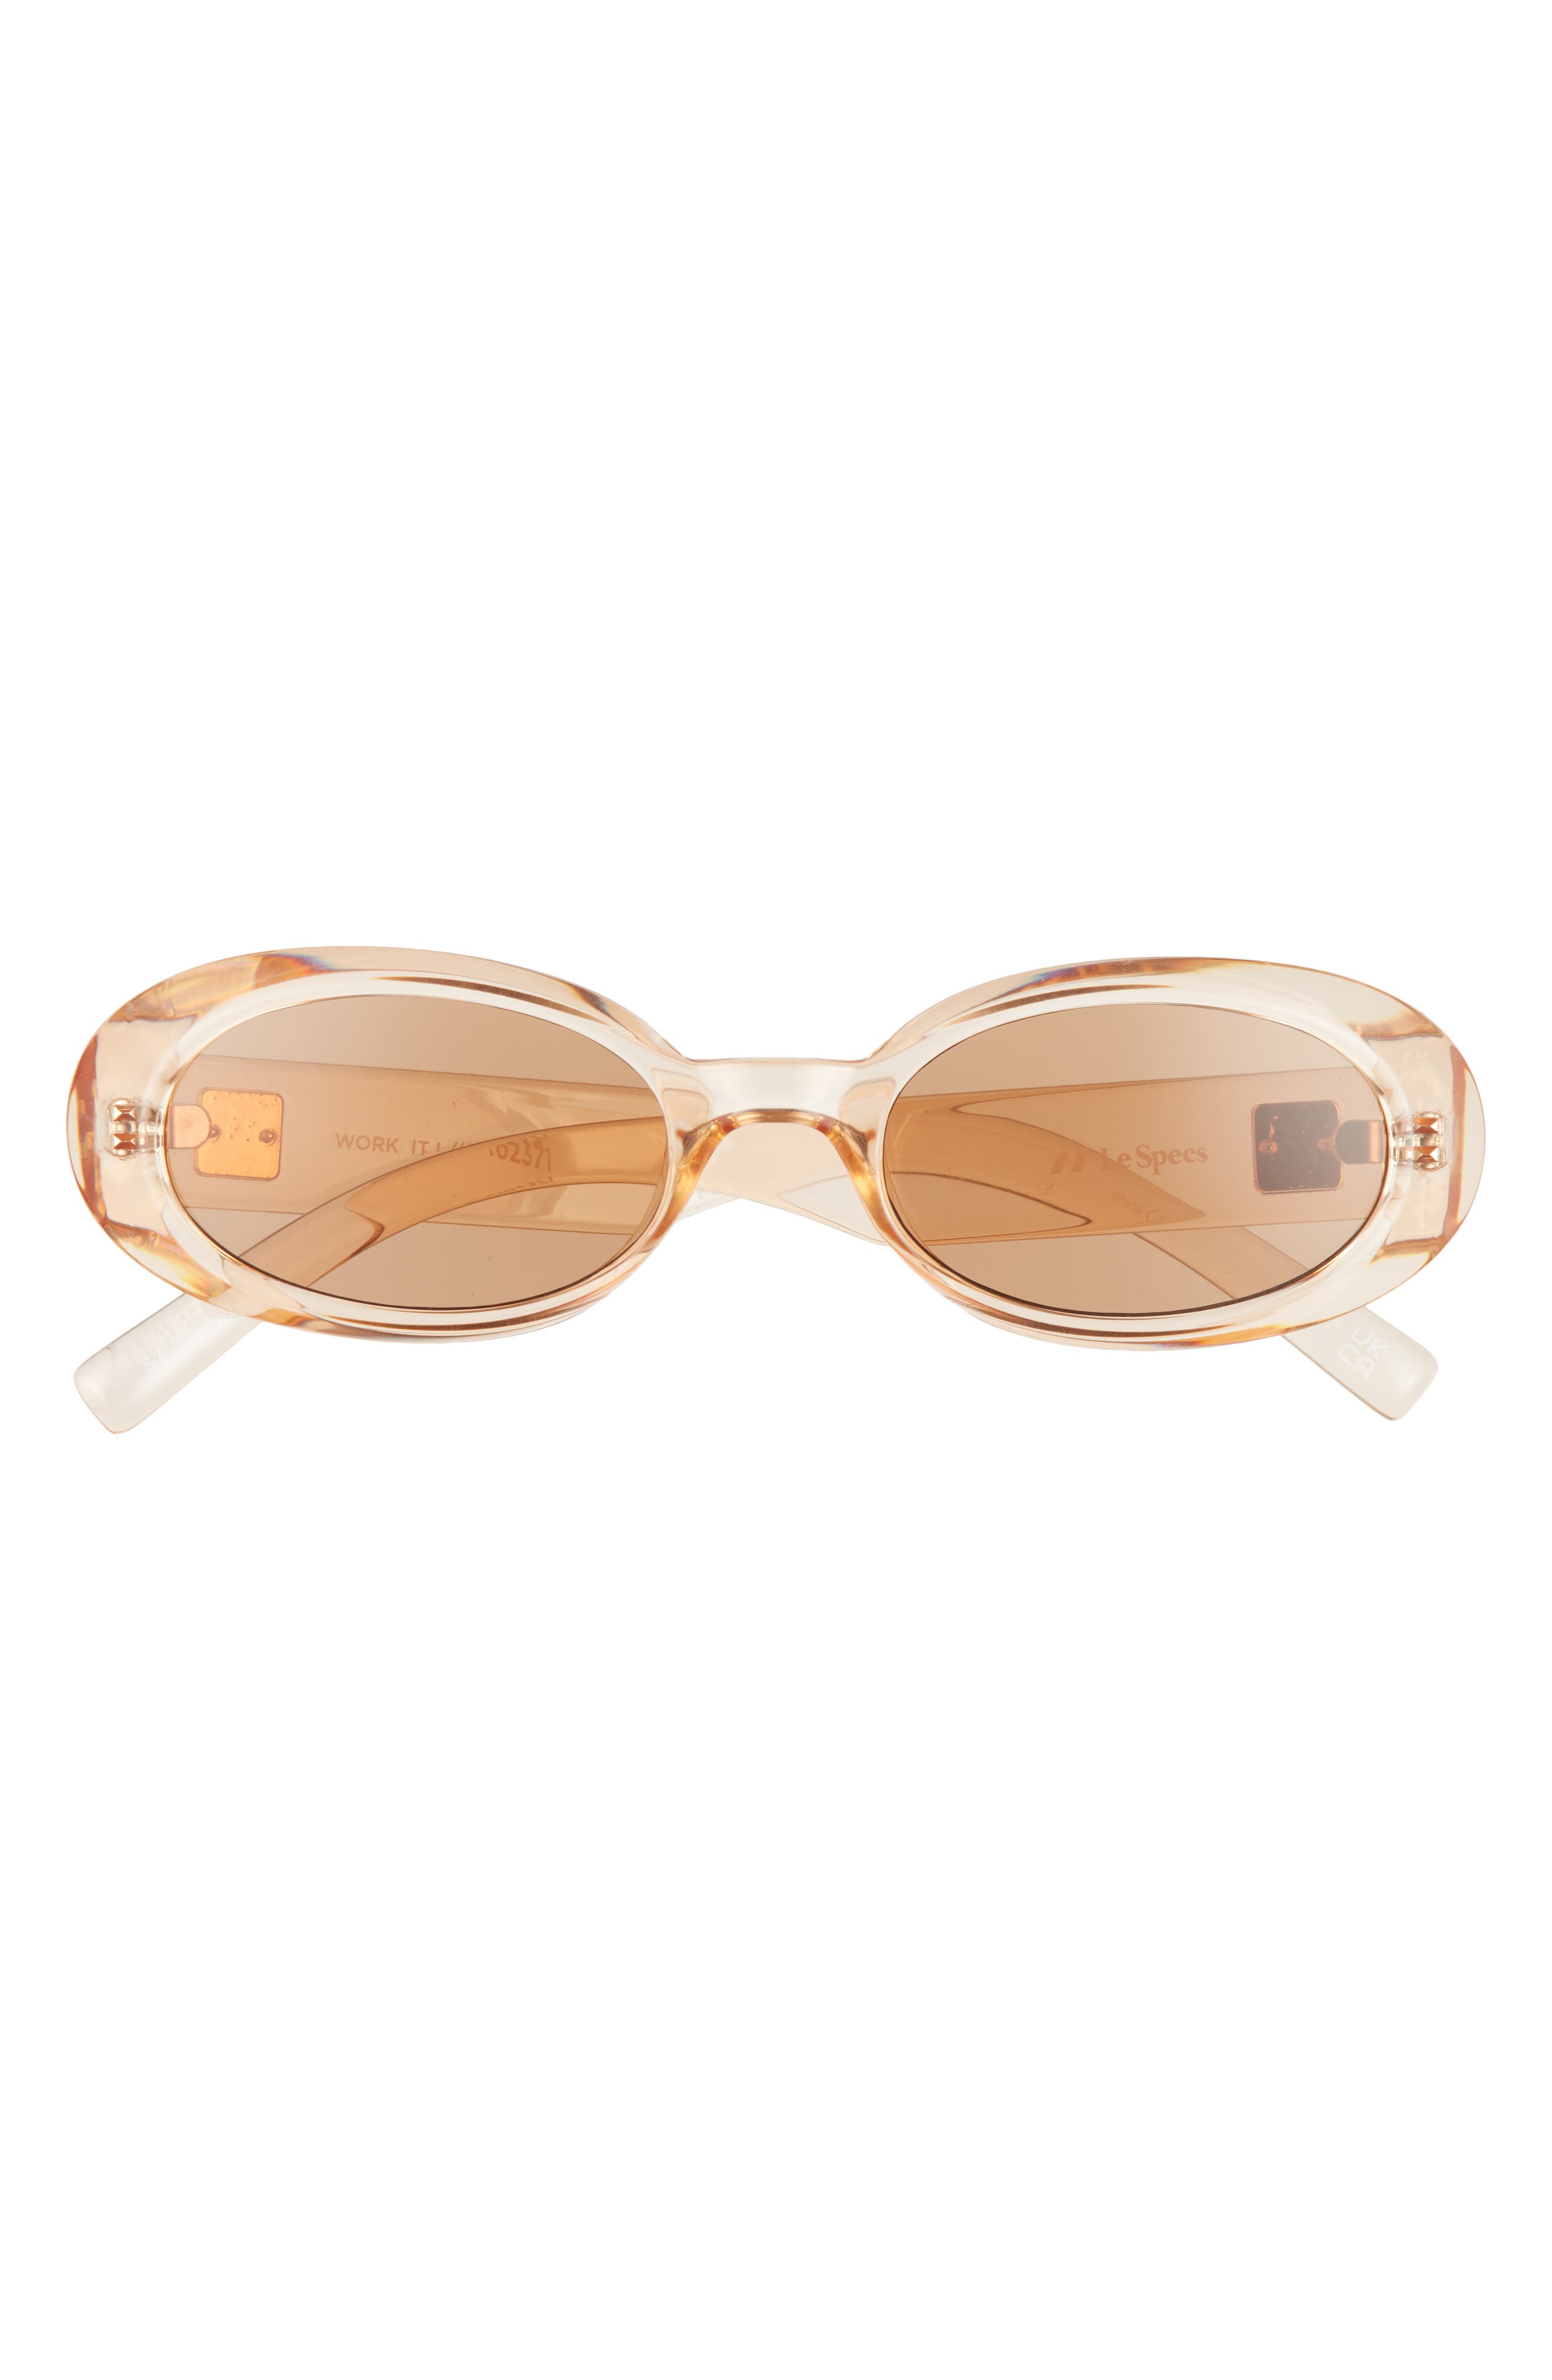 Le Specs Work It 53mm Oval Sunglasses in Nougat /Tan Tint at Nordstrom